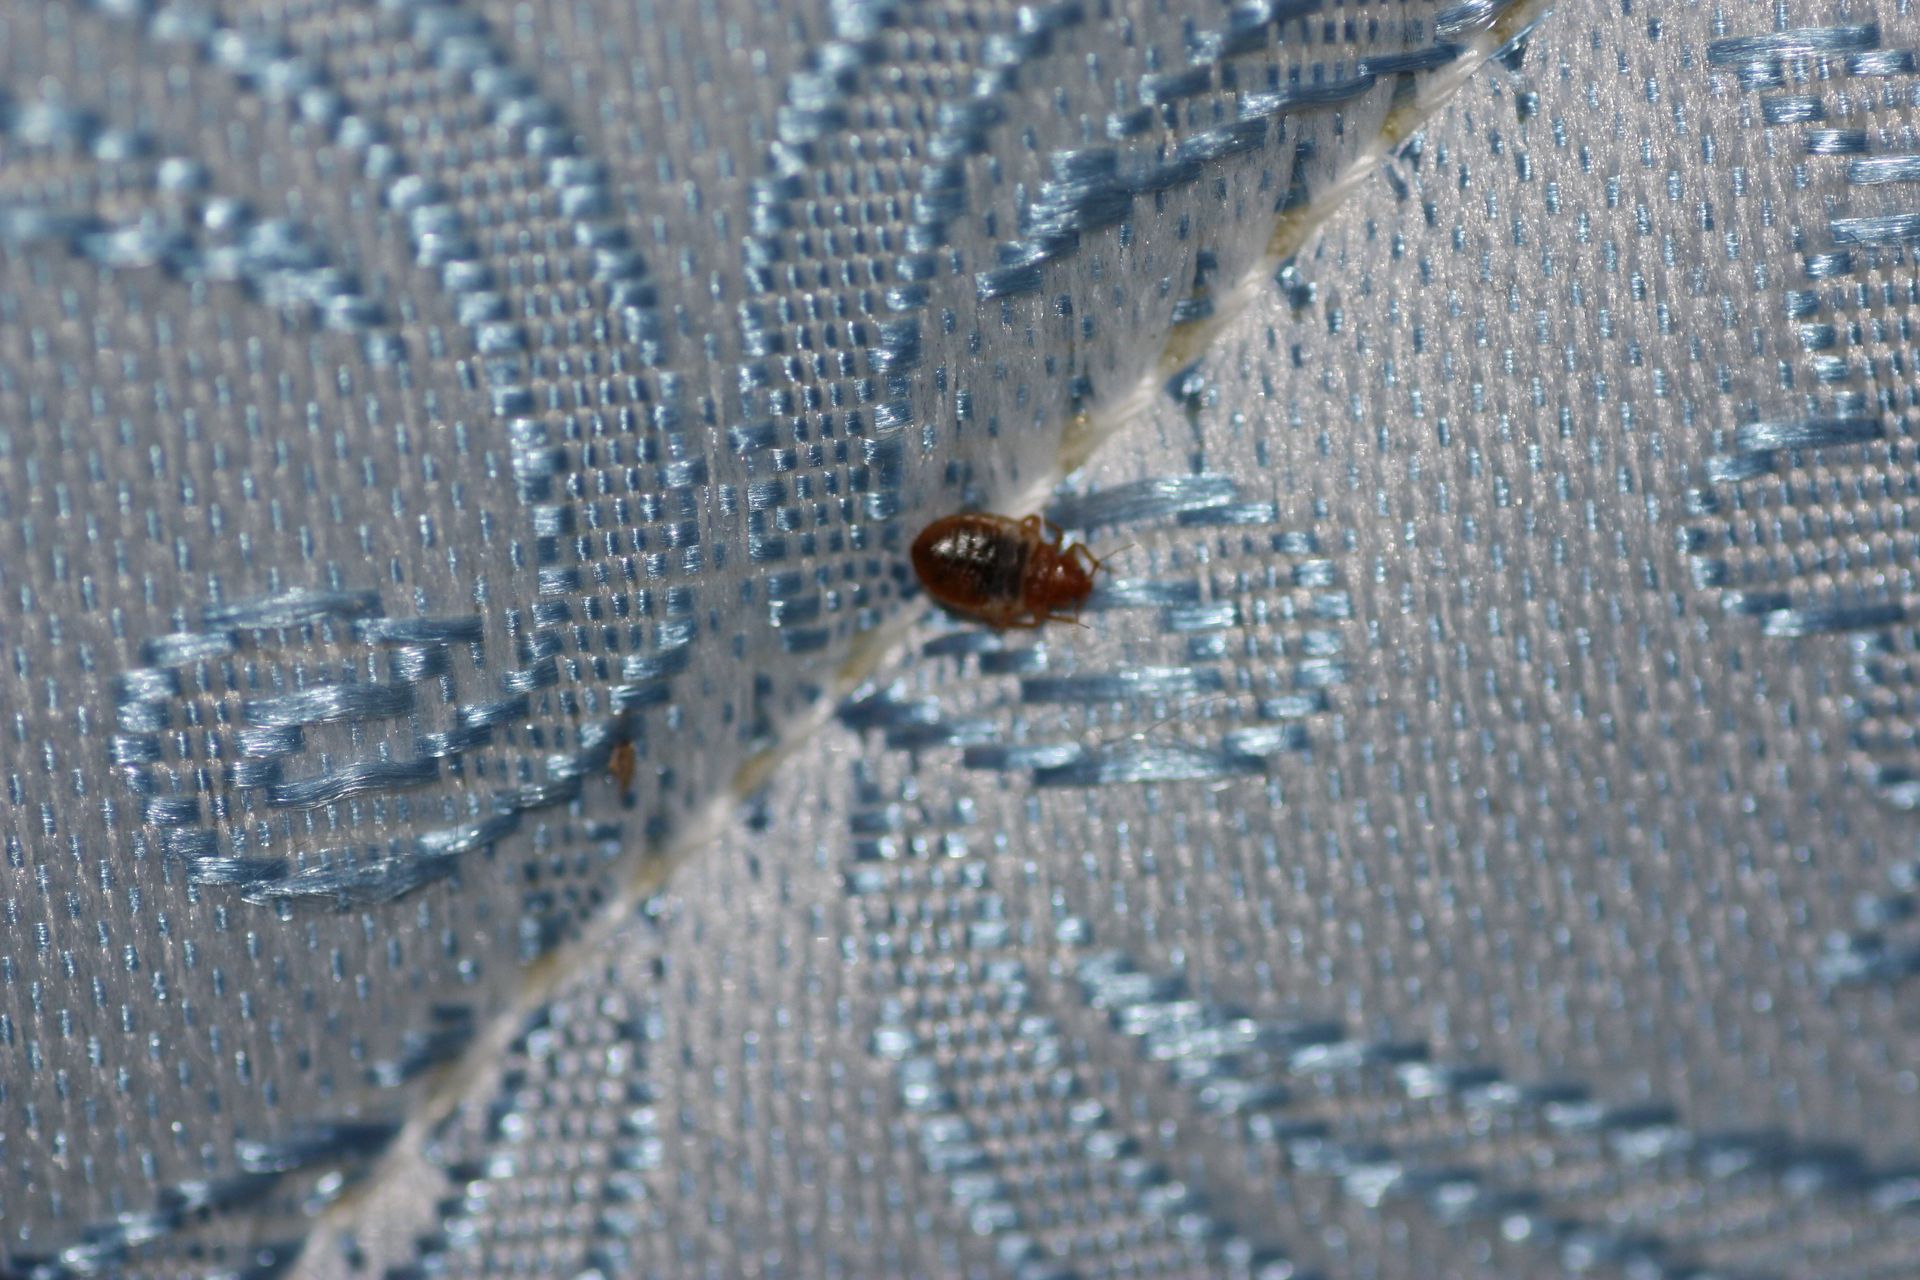 A bedbug sits on a piece of fabric and gives proportion to how small bedbugs actually are.